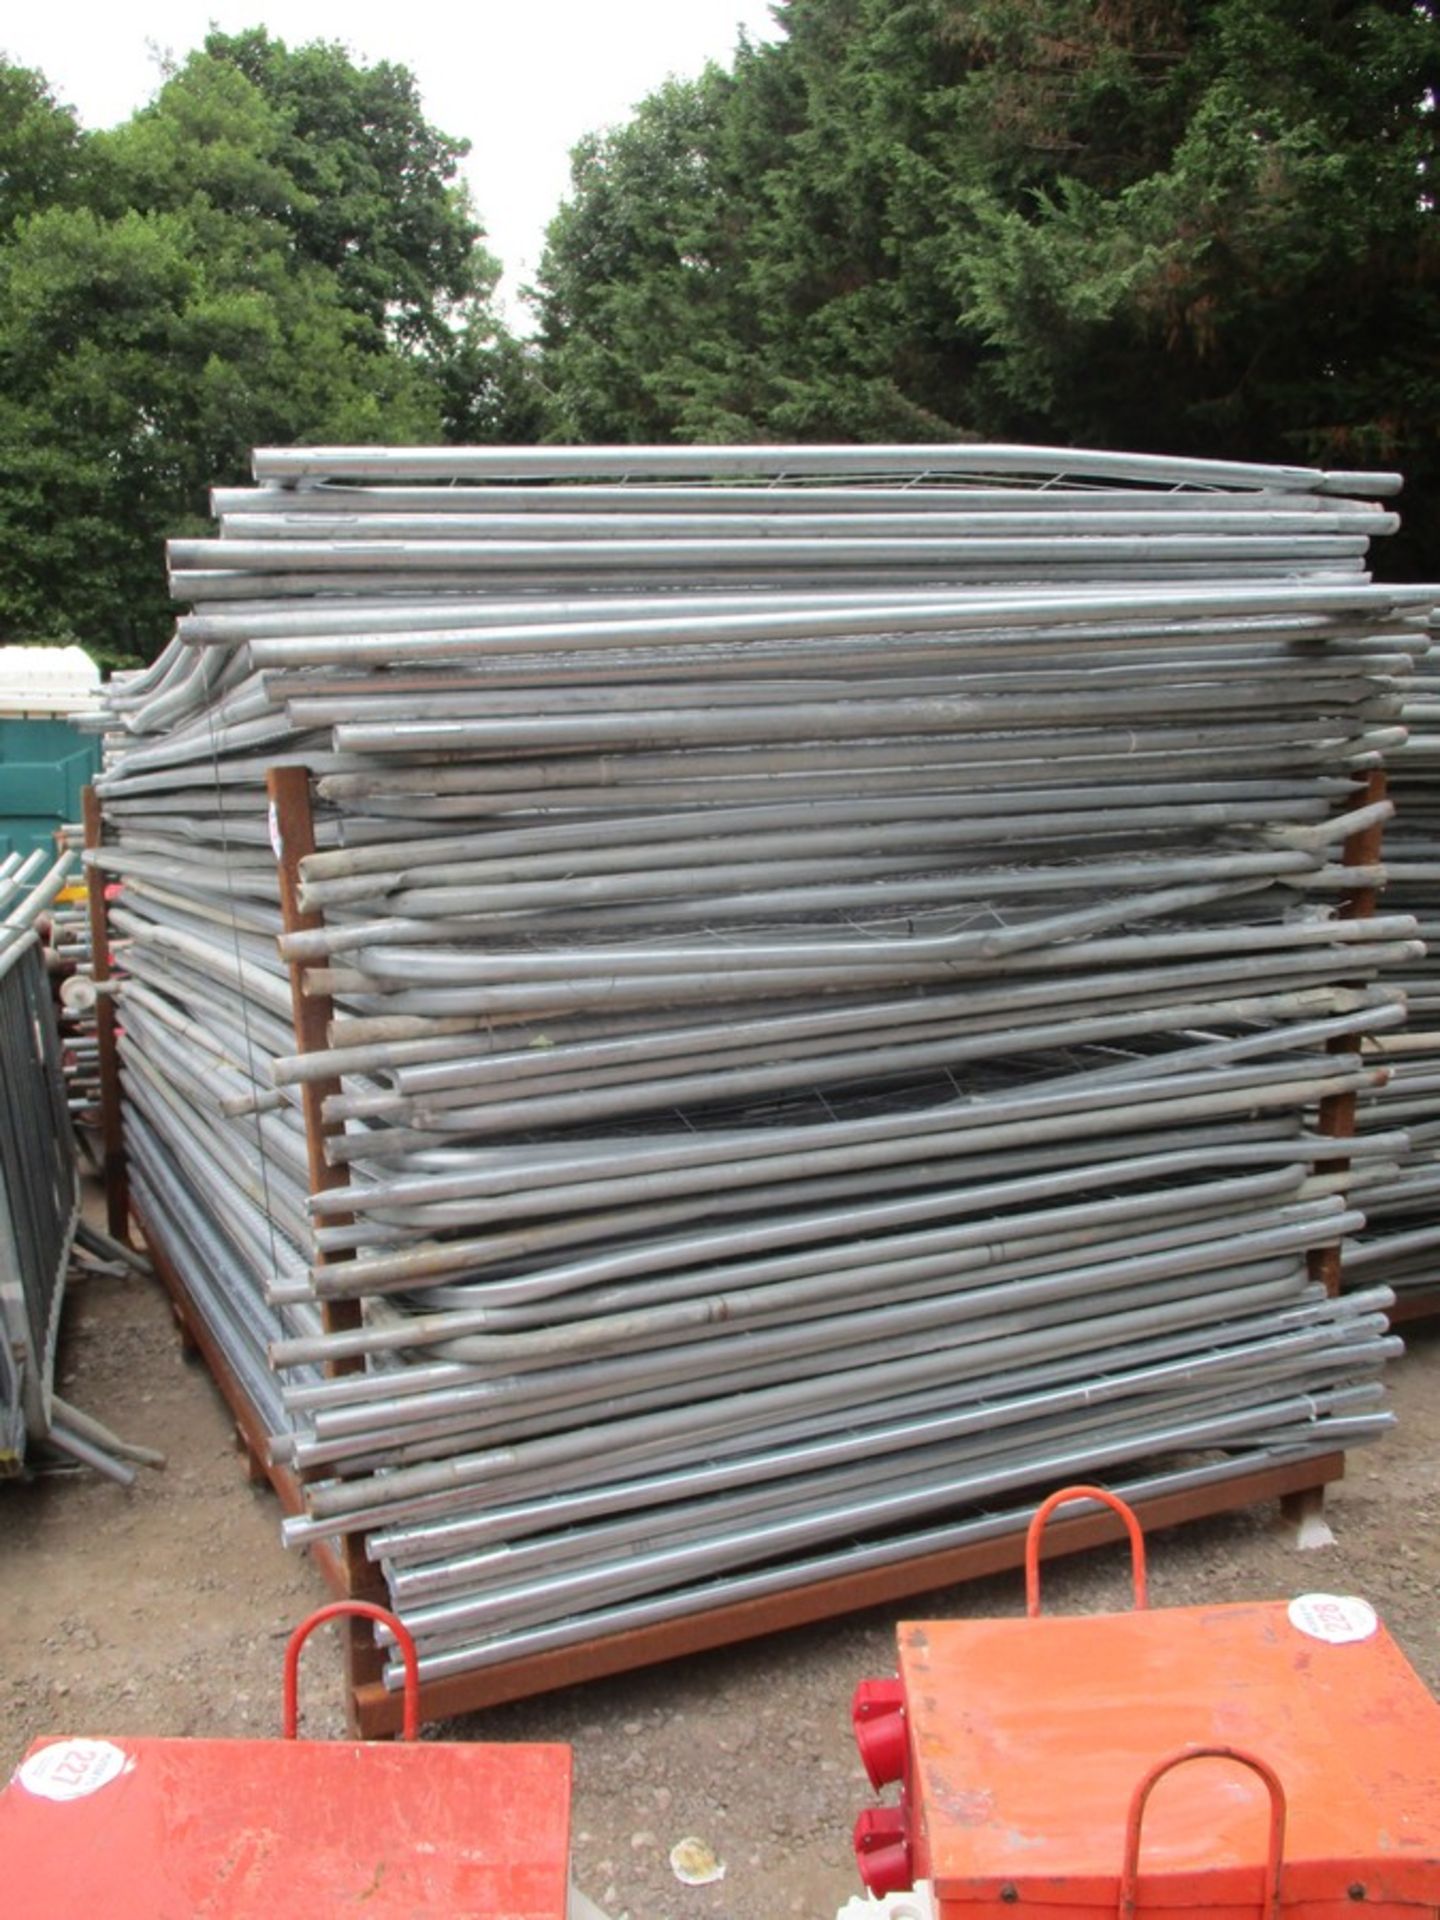 APPROX 52 HERRAS FENCE PANELS